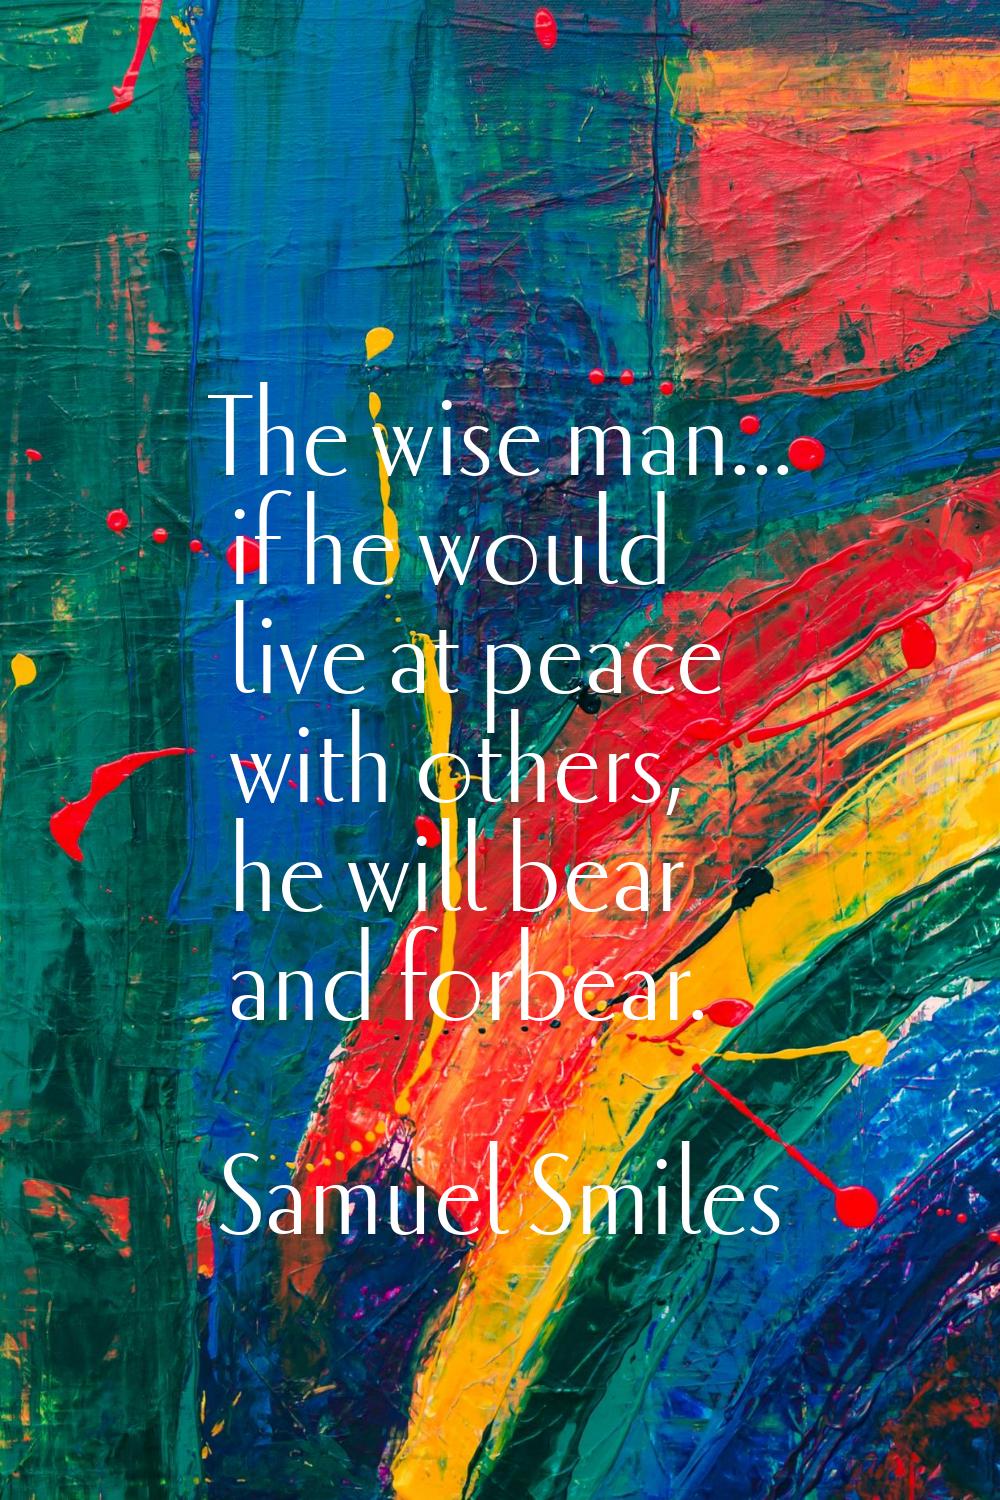 The wise man... if he would live at peace with others, he will bear and forbear.